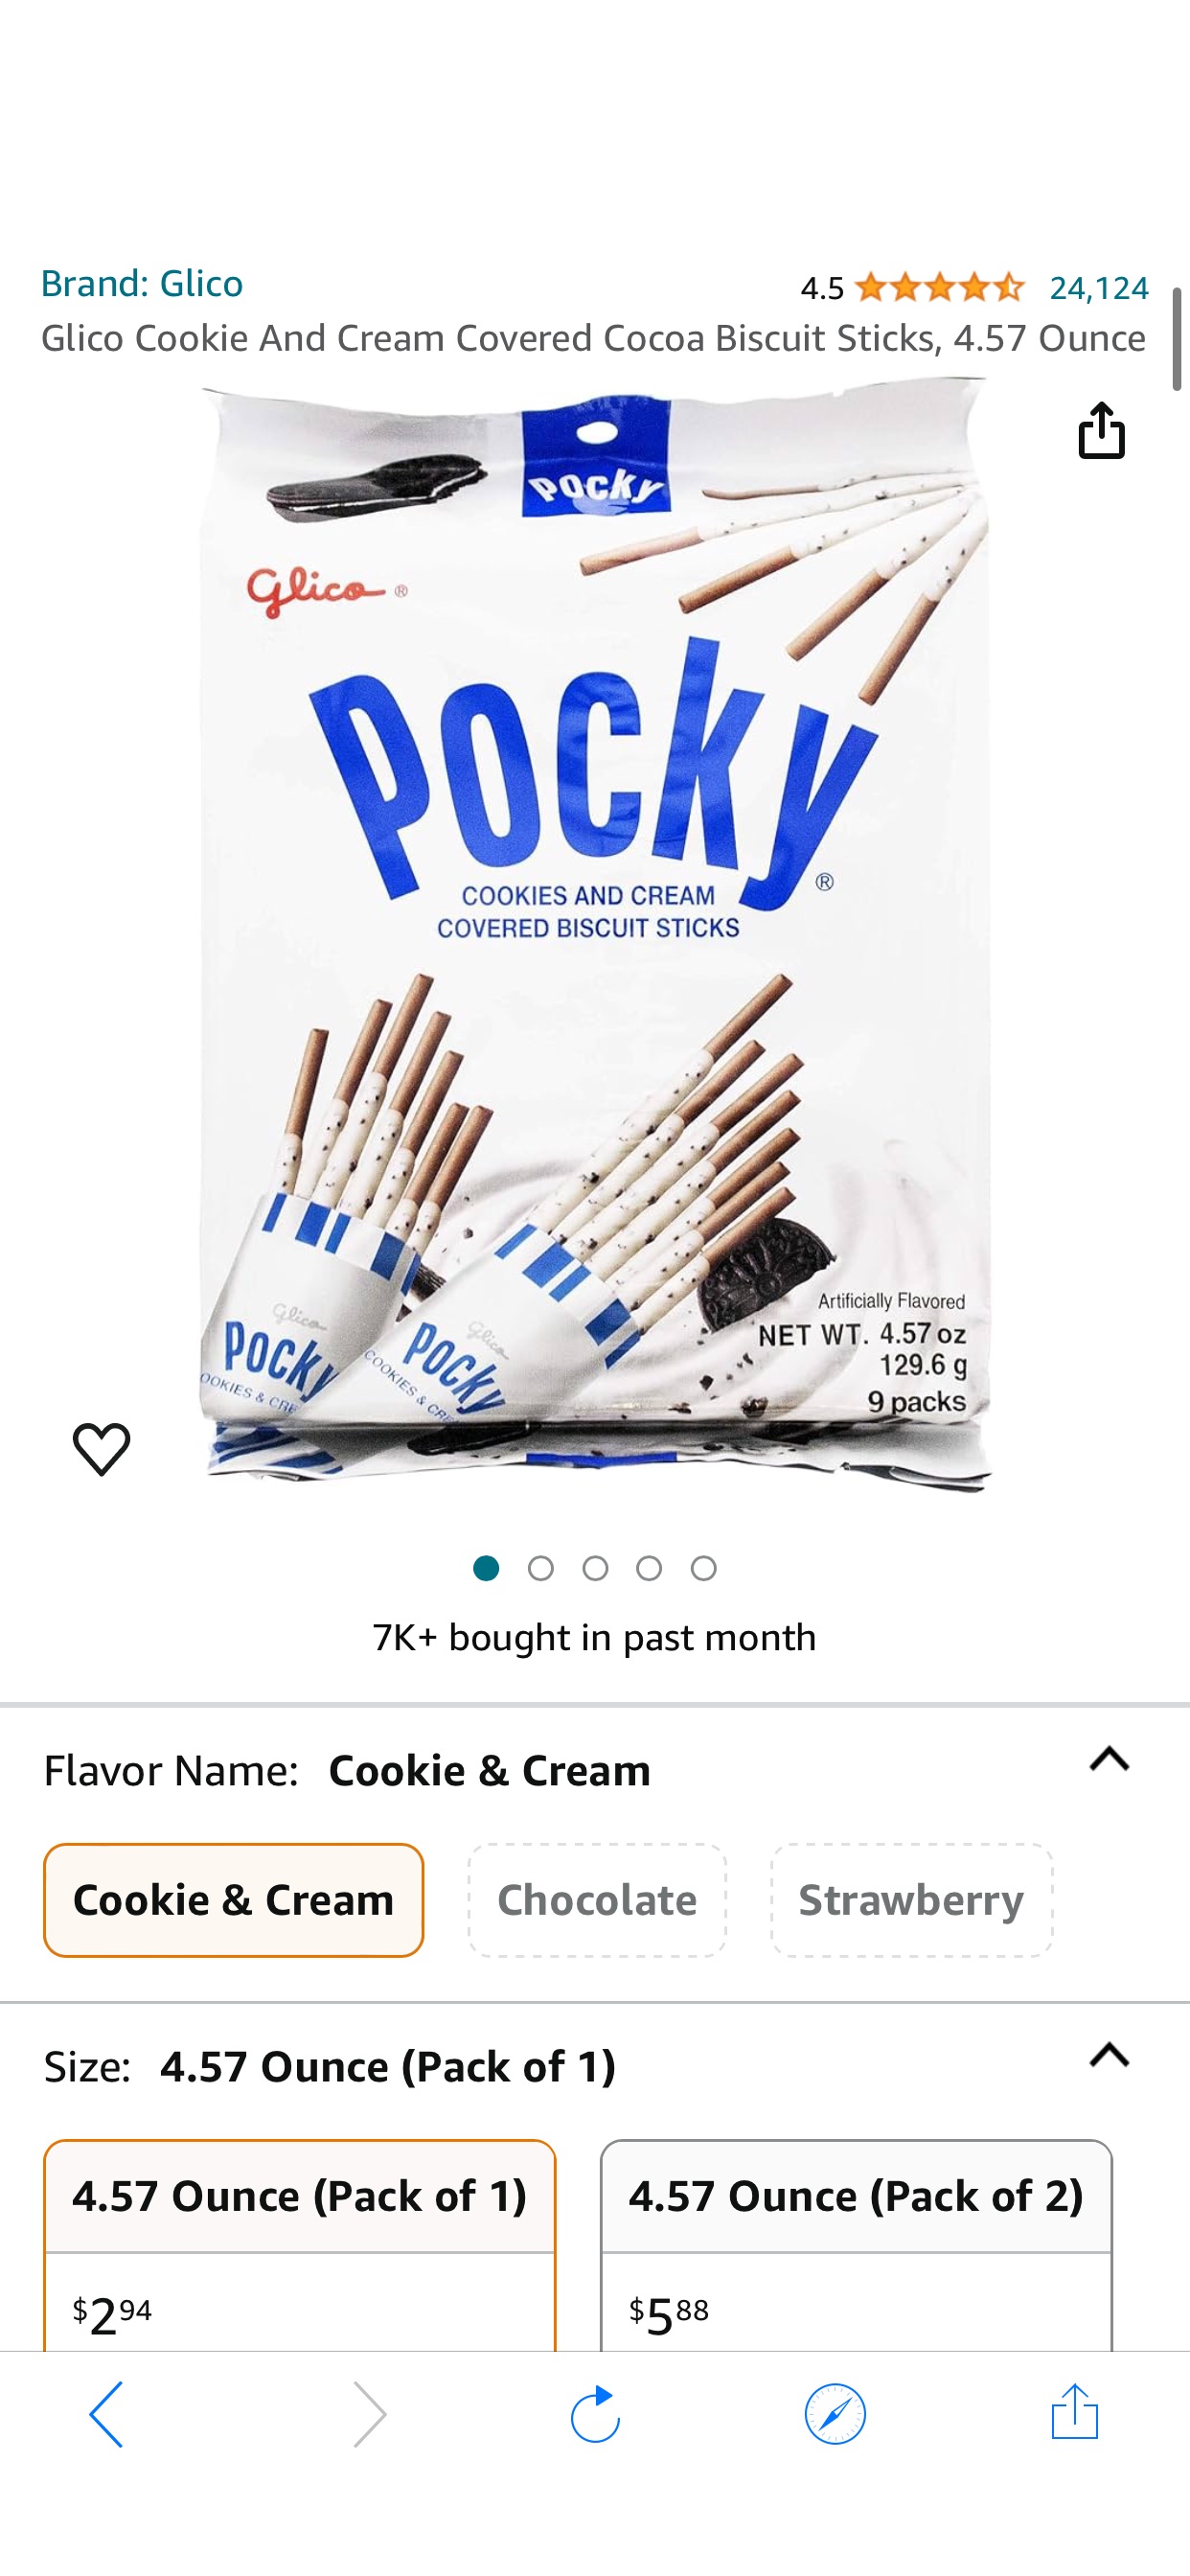 Amazon.com: Glico Cookie And Cream Covered Cocoa Biscuit Sticks, 4.57 Ounce : Grocery & Gourmet Food饼干